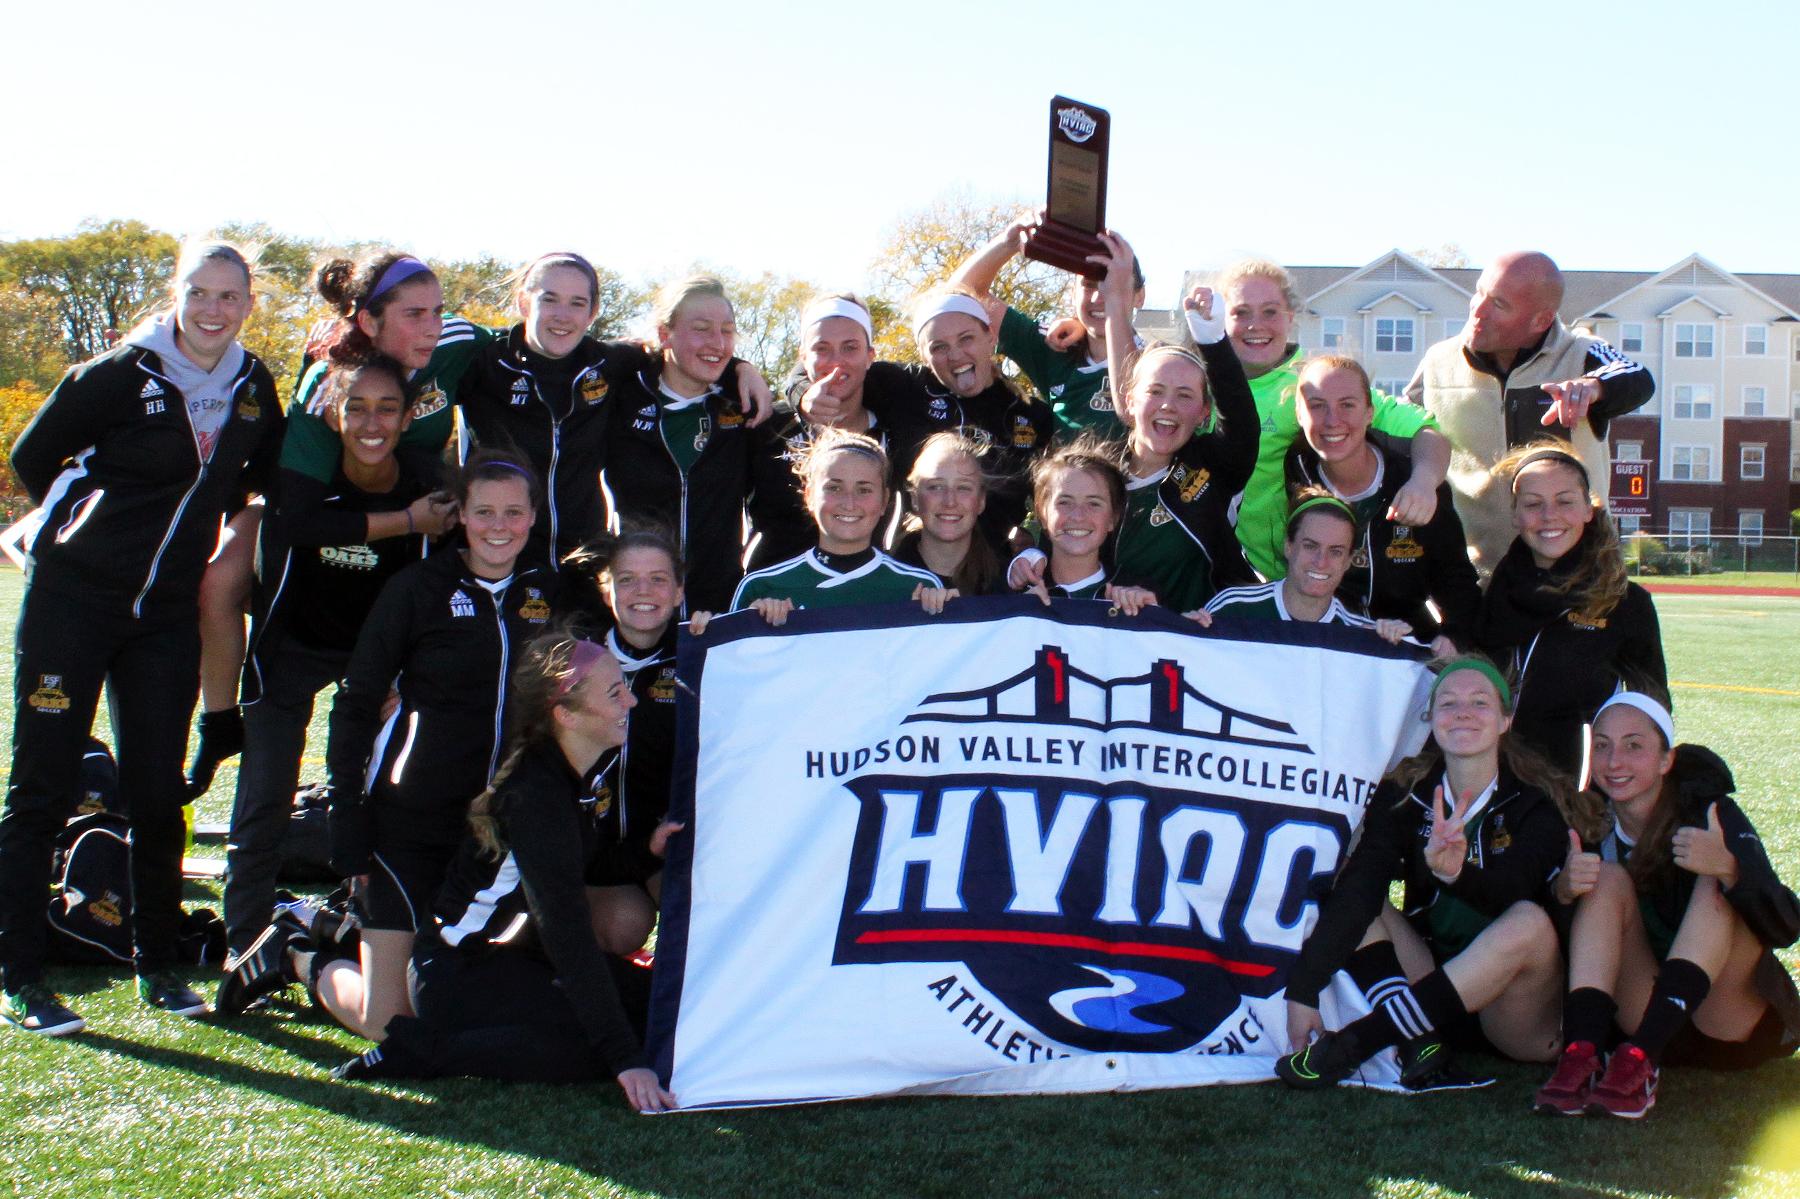 SUNY ESF Wins First Title Halting Albany Pharmacy's Three-Year Reign Atop Women's Soccer